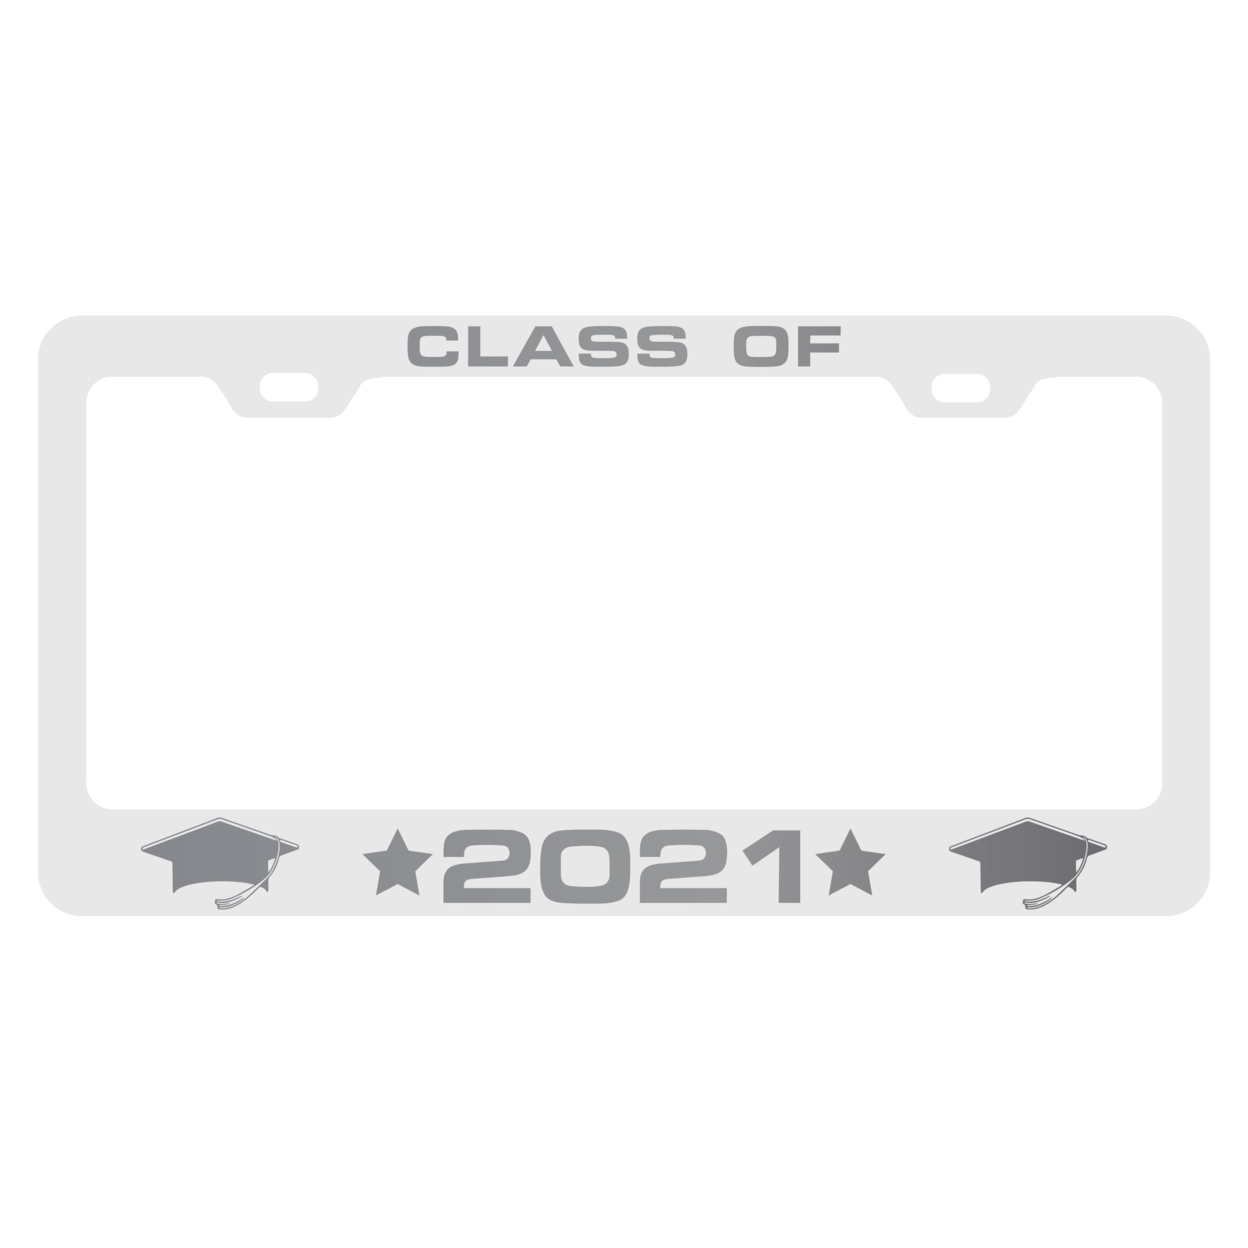 Class Of 2021 Grad License Plate Frame